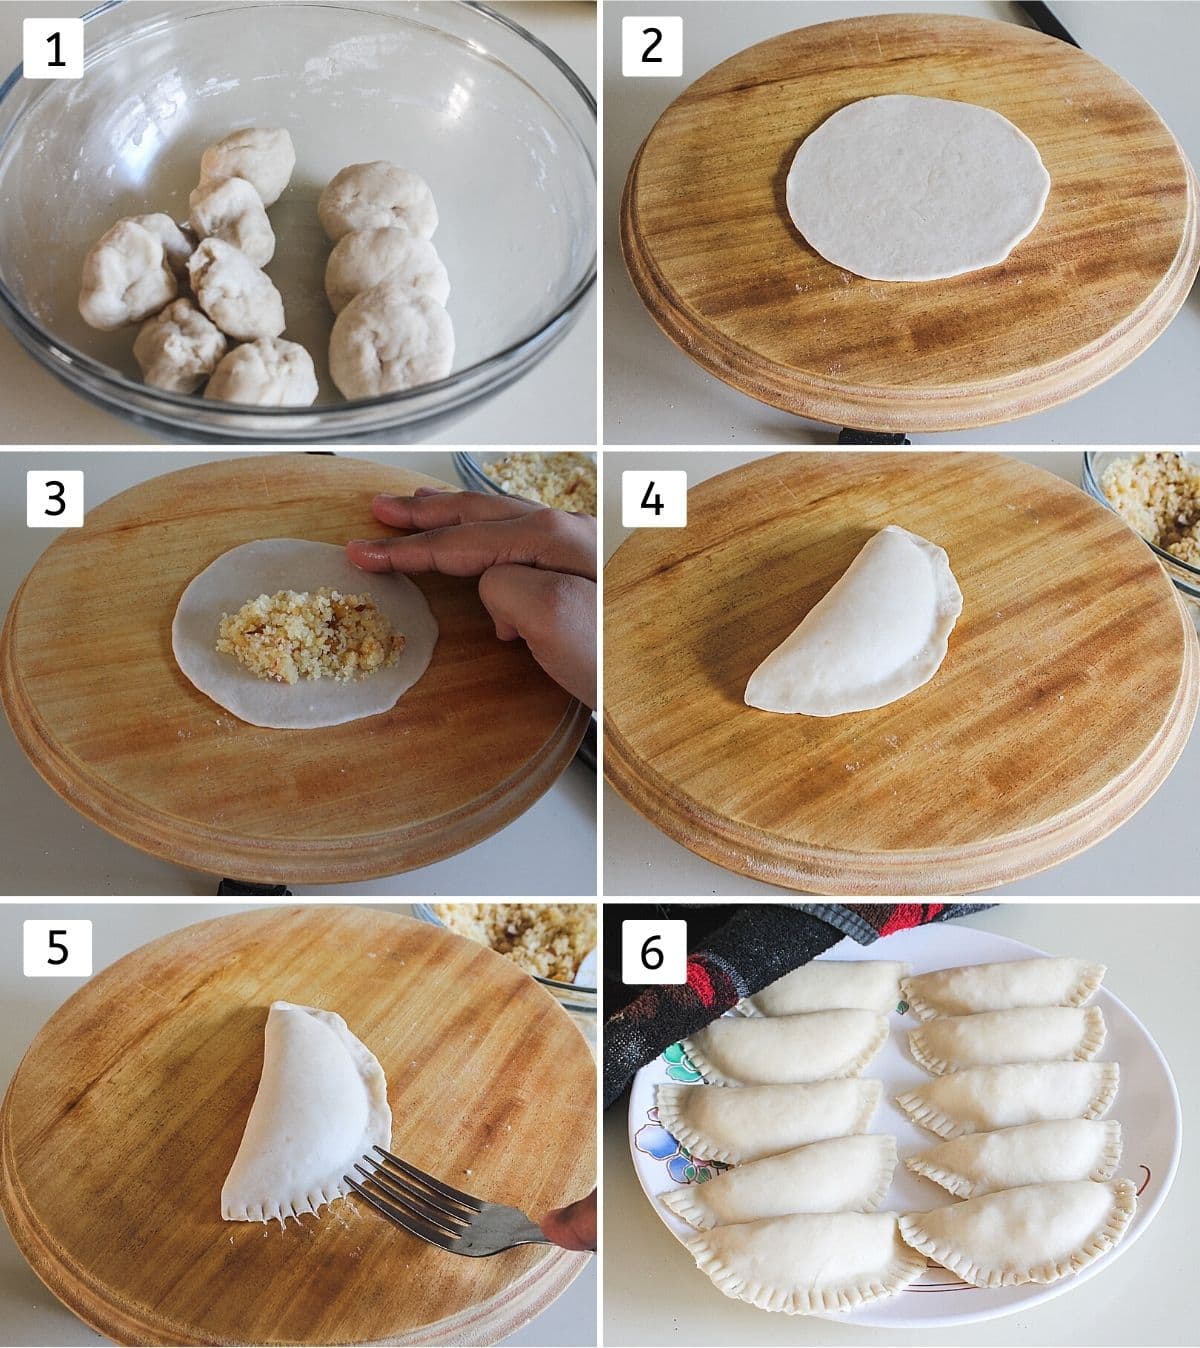 Collage of 6 steps showing small dough discs, rolled disc, stuffing in the center, shaped in half-circle, sealing with fork, all shaped gujia in a plate